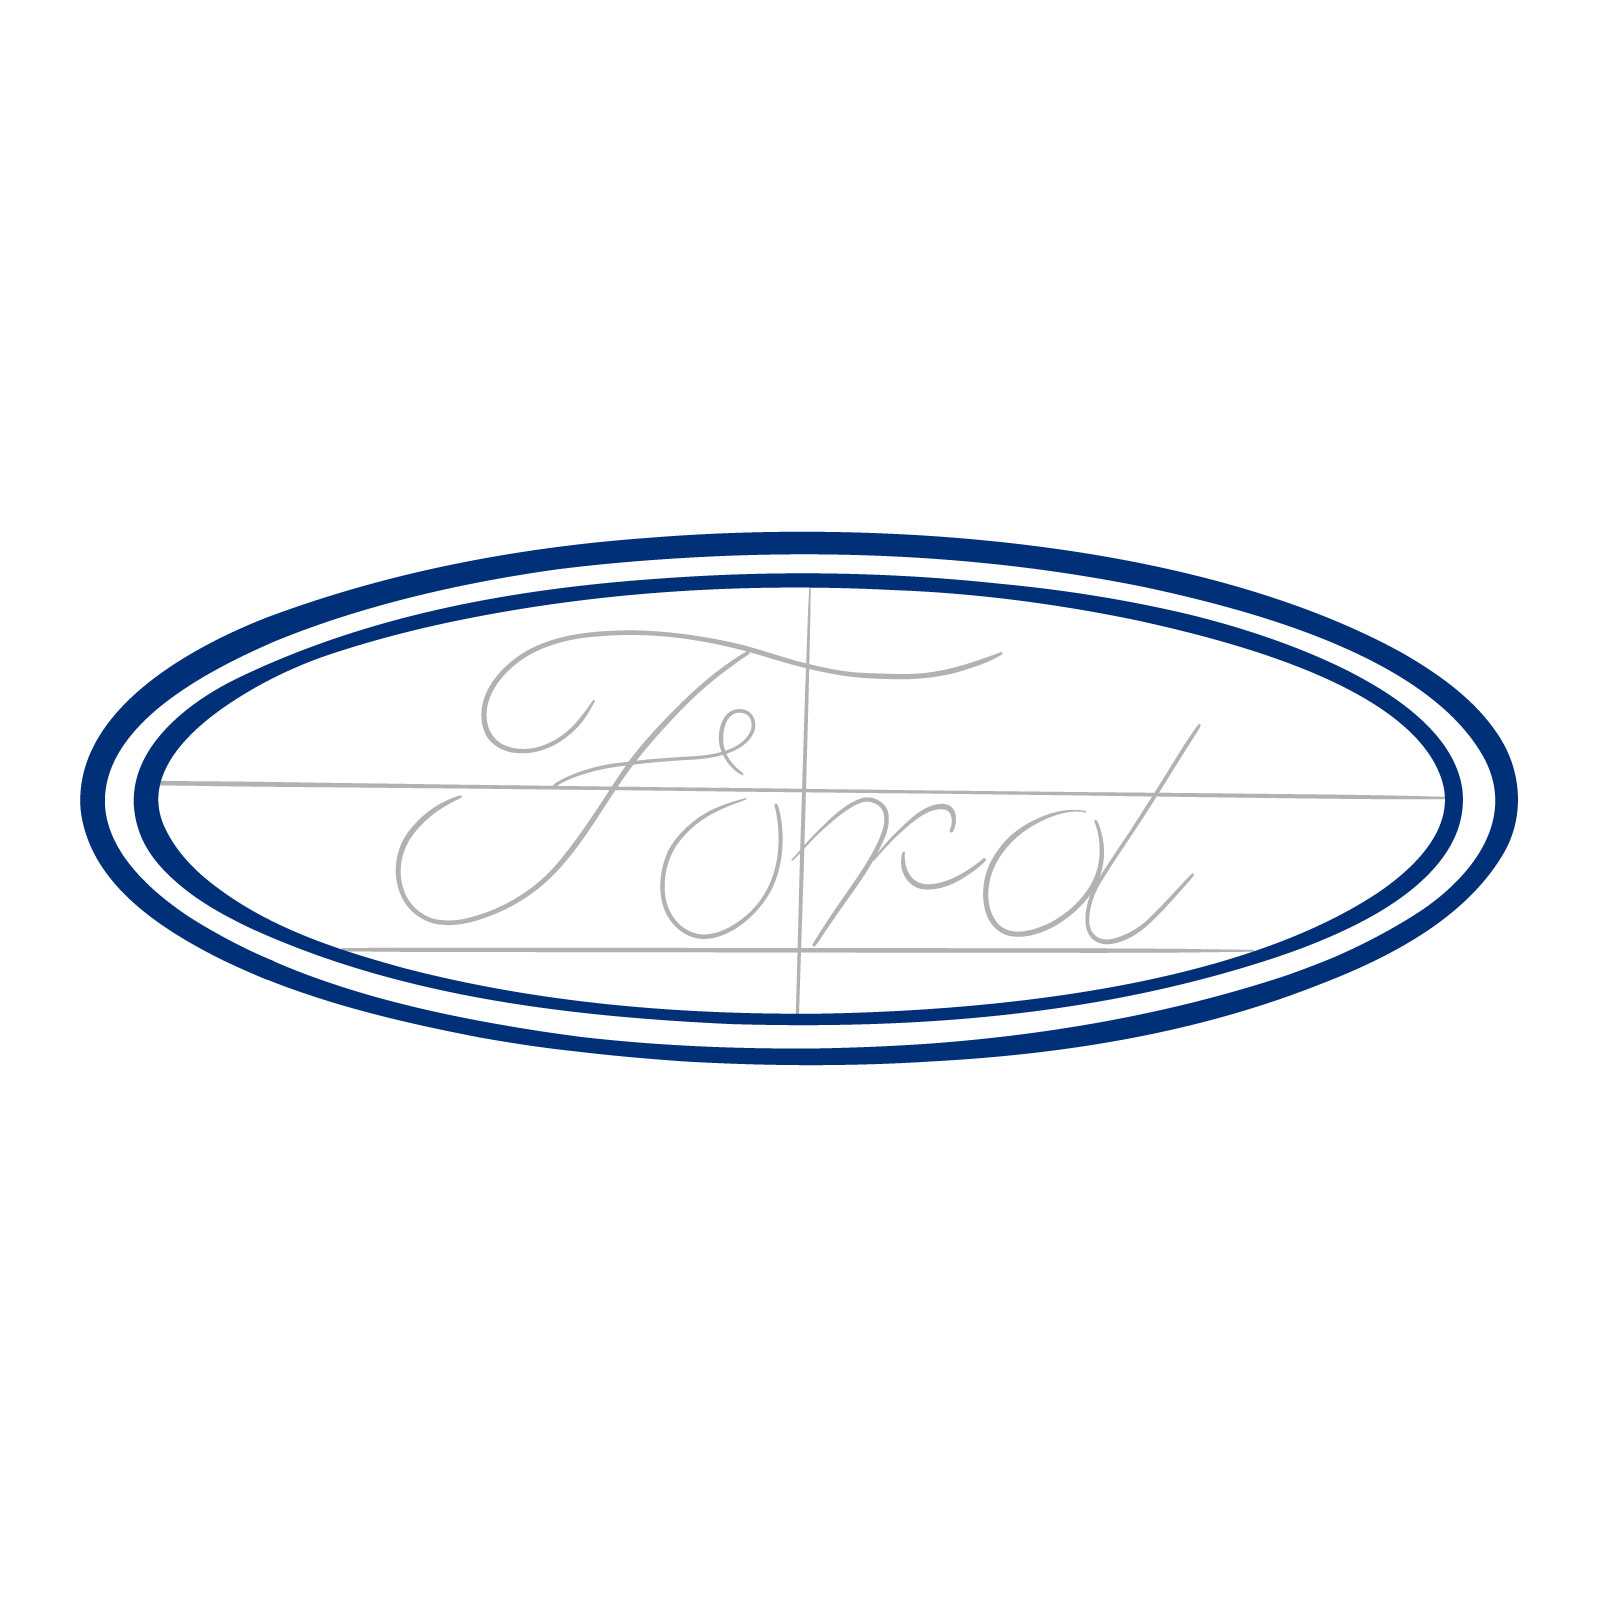 How to draw the Ford logo - step 05